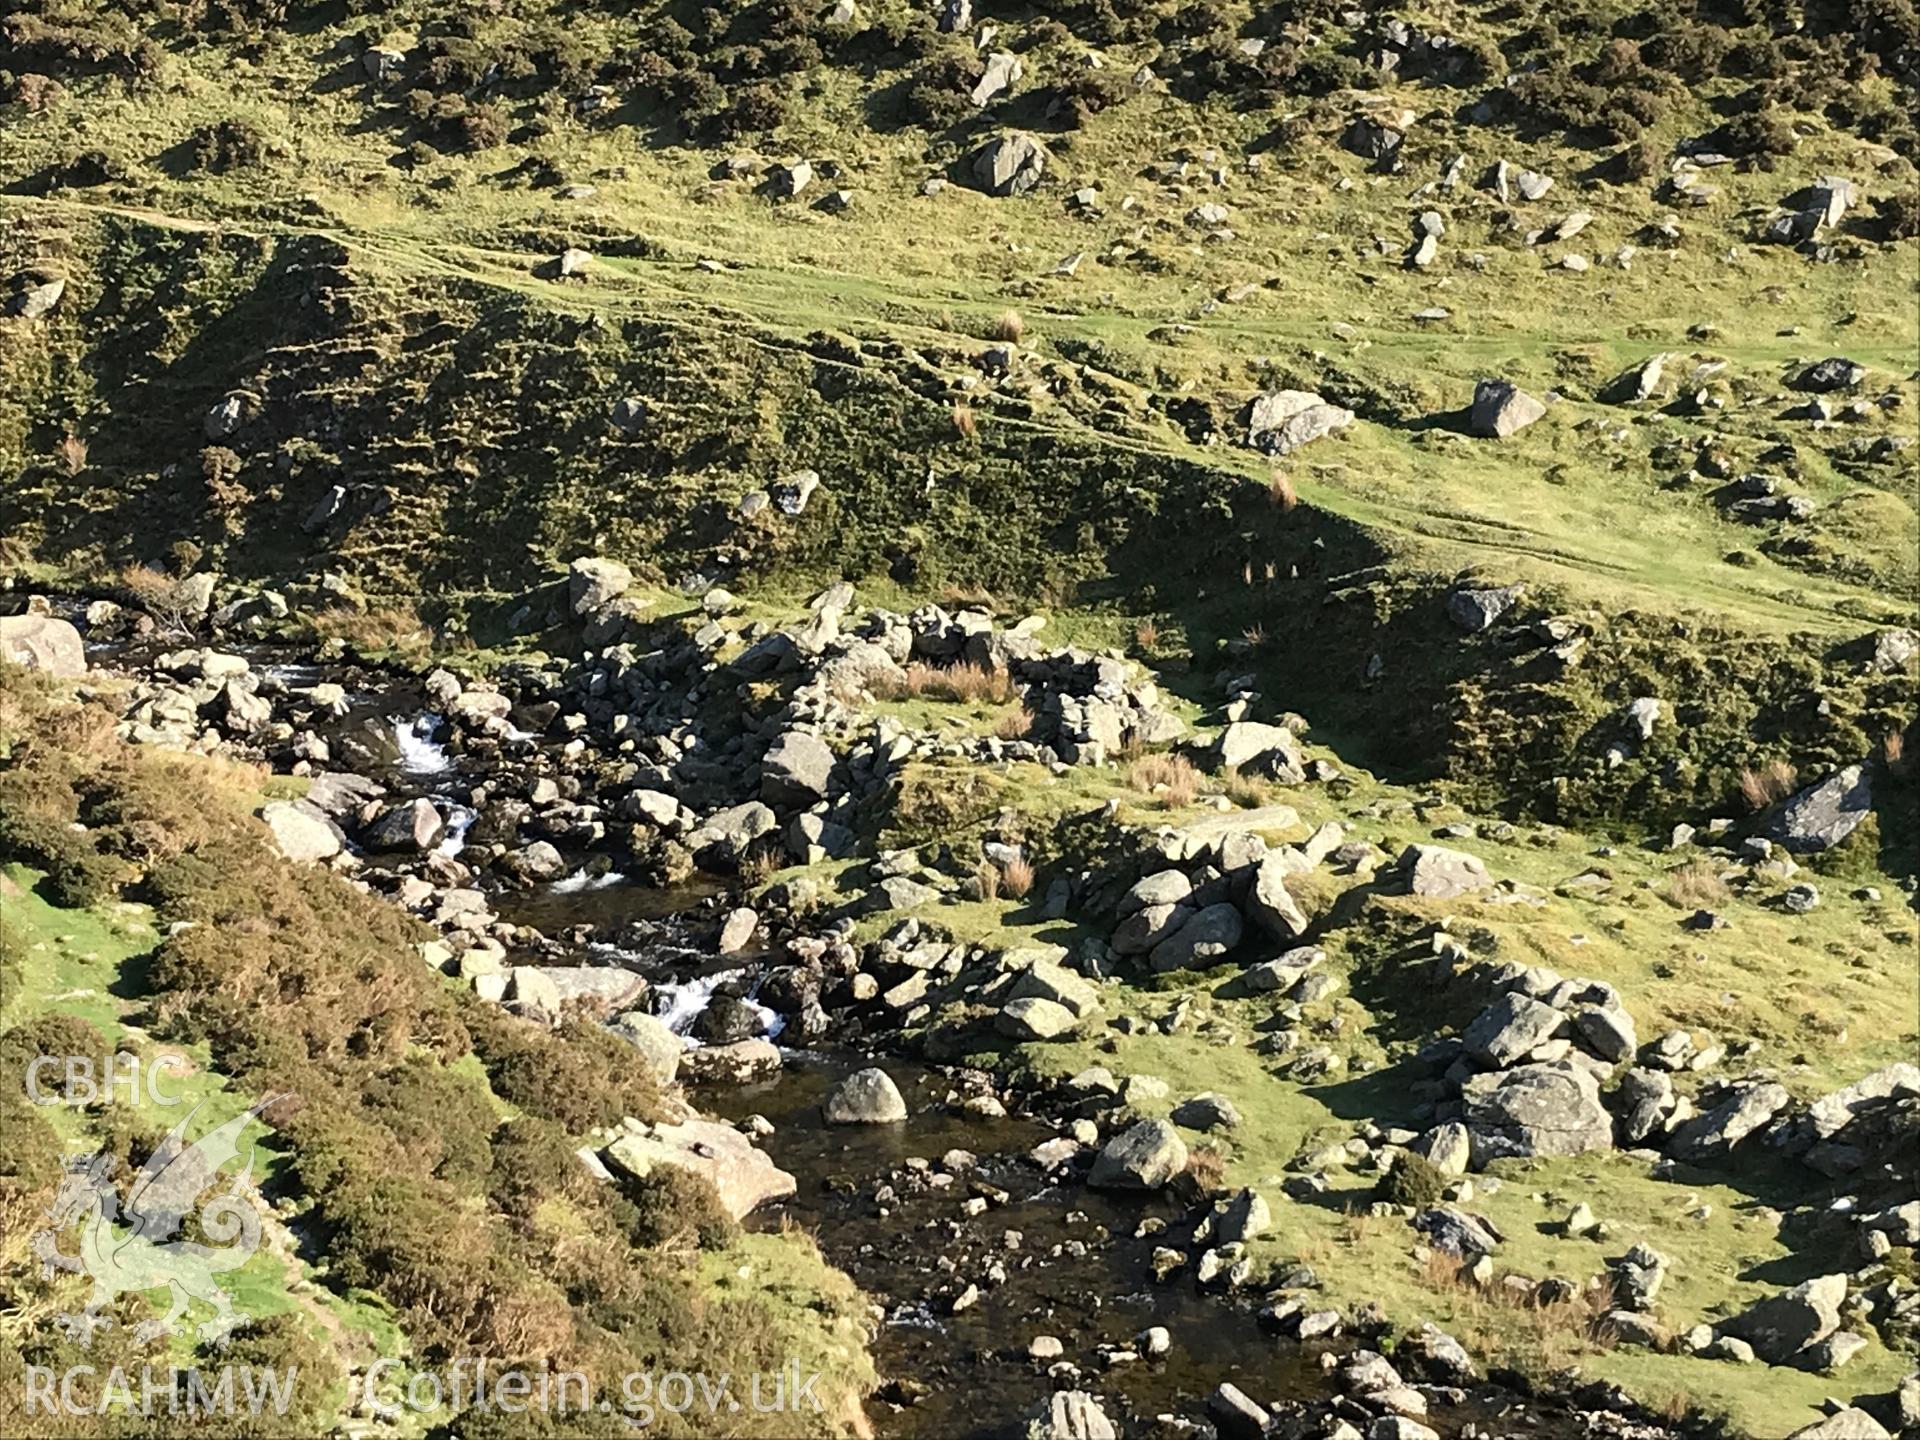 Colour photo showing view of a sheephold, Aber, taken by Paul R. Davis, 2018.